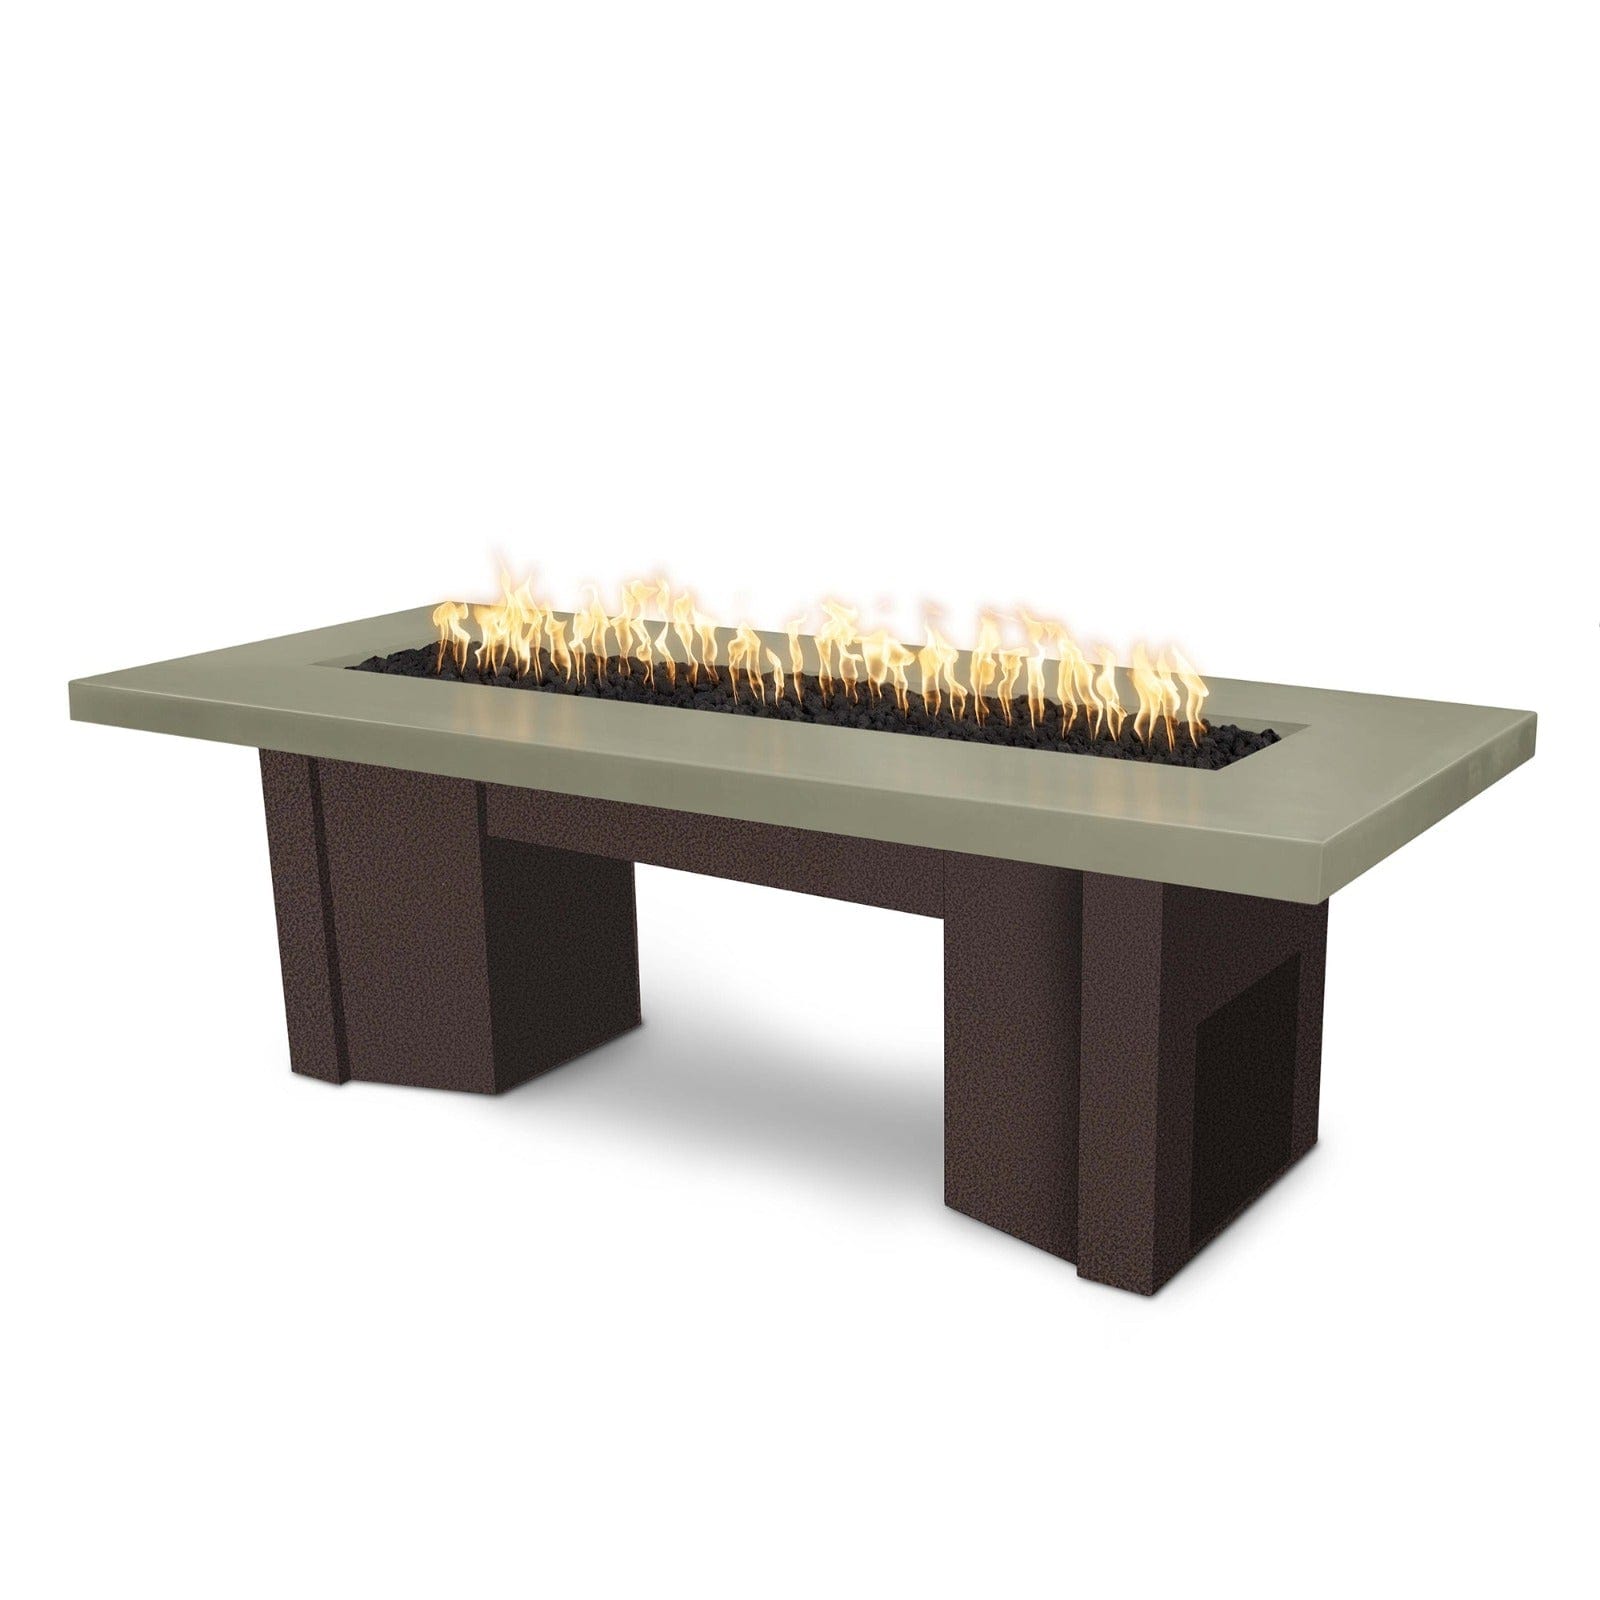 The Outdoor Plus Fire Features Ash (-ASH) / Copper Vein Powder Coated Steel (-CPV) The Outdoor Plus 60" Alameda Fire Table Smooth Concrete in Natural Gas - Match Lit / OPT-ALMGFRC60-NG